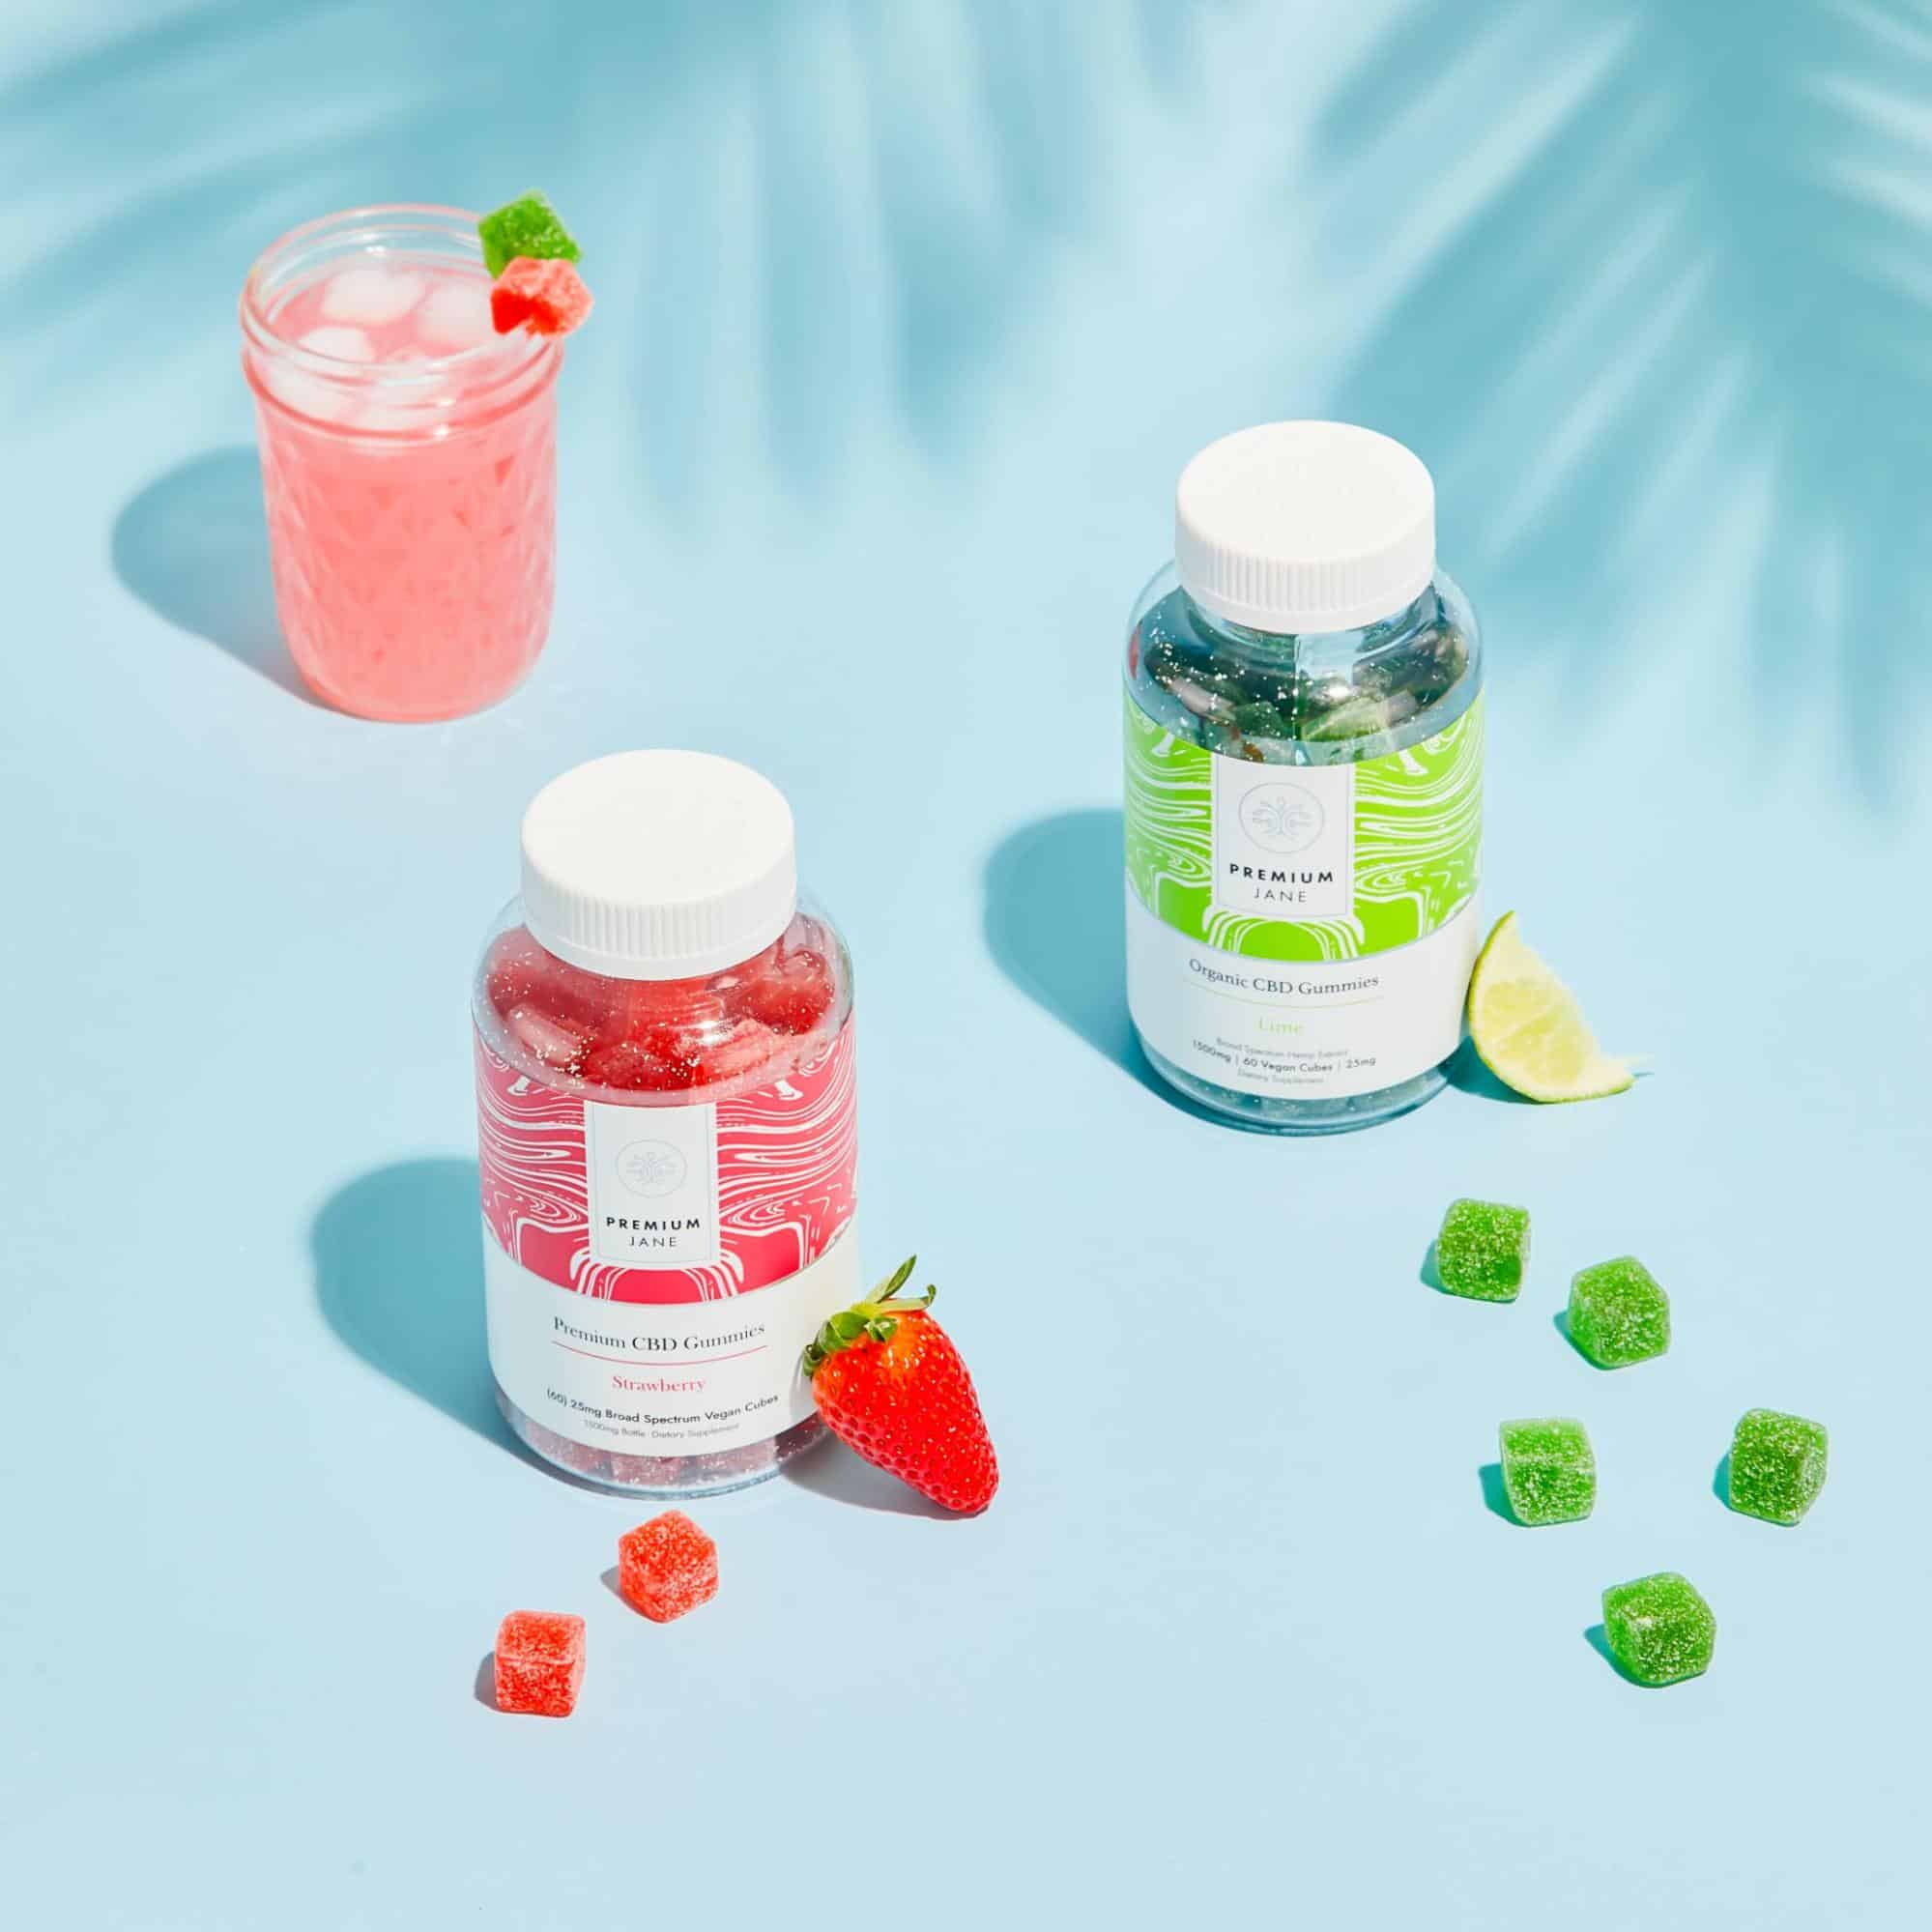 Is There a Best Time of Day to Use CBD Gummies